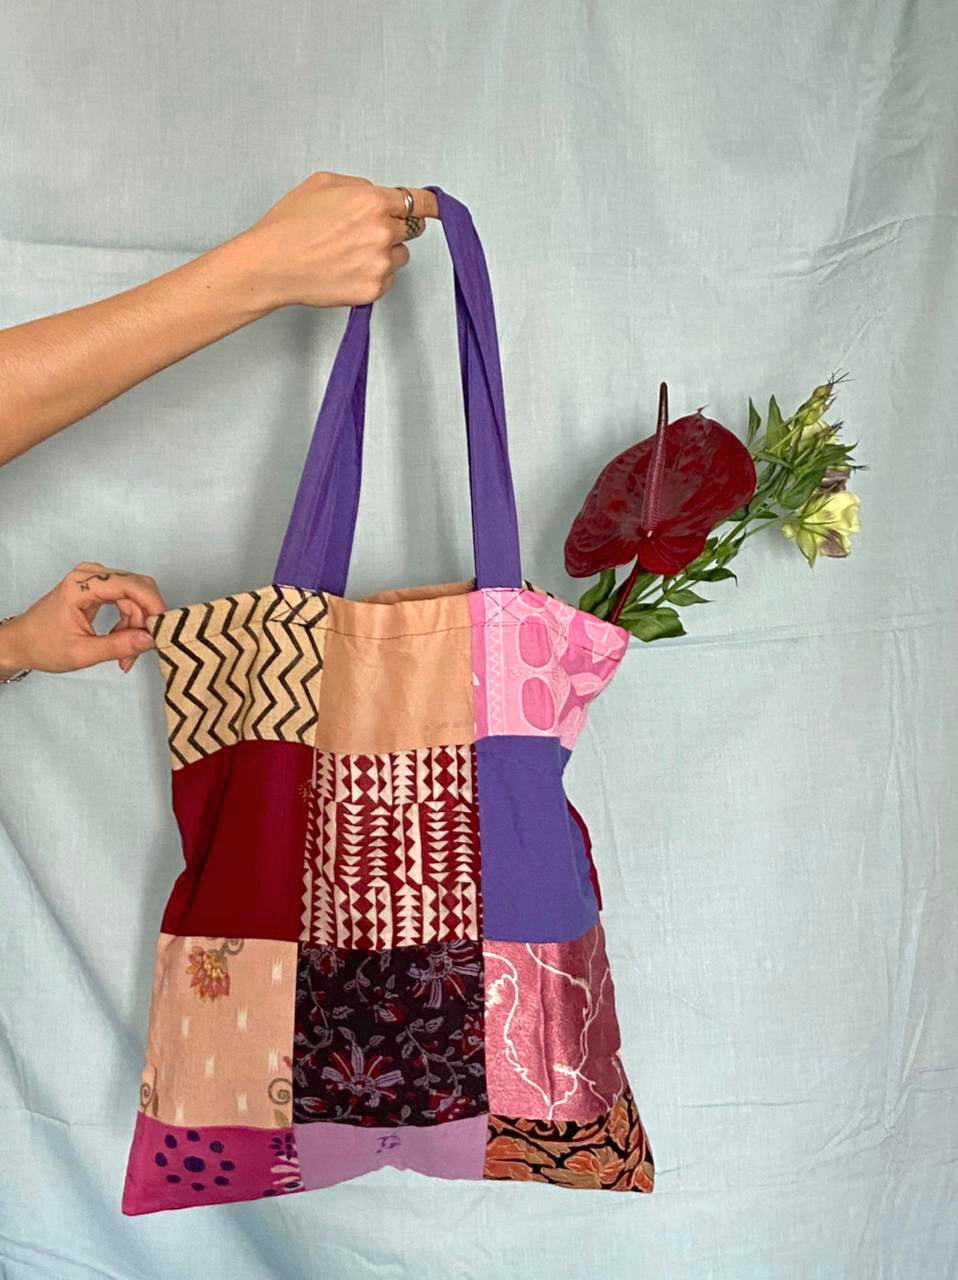 What To Do With Old Clothes? Oh scrap will help you upcycle and thrift clothes